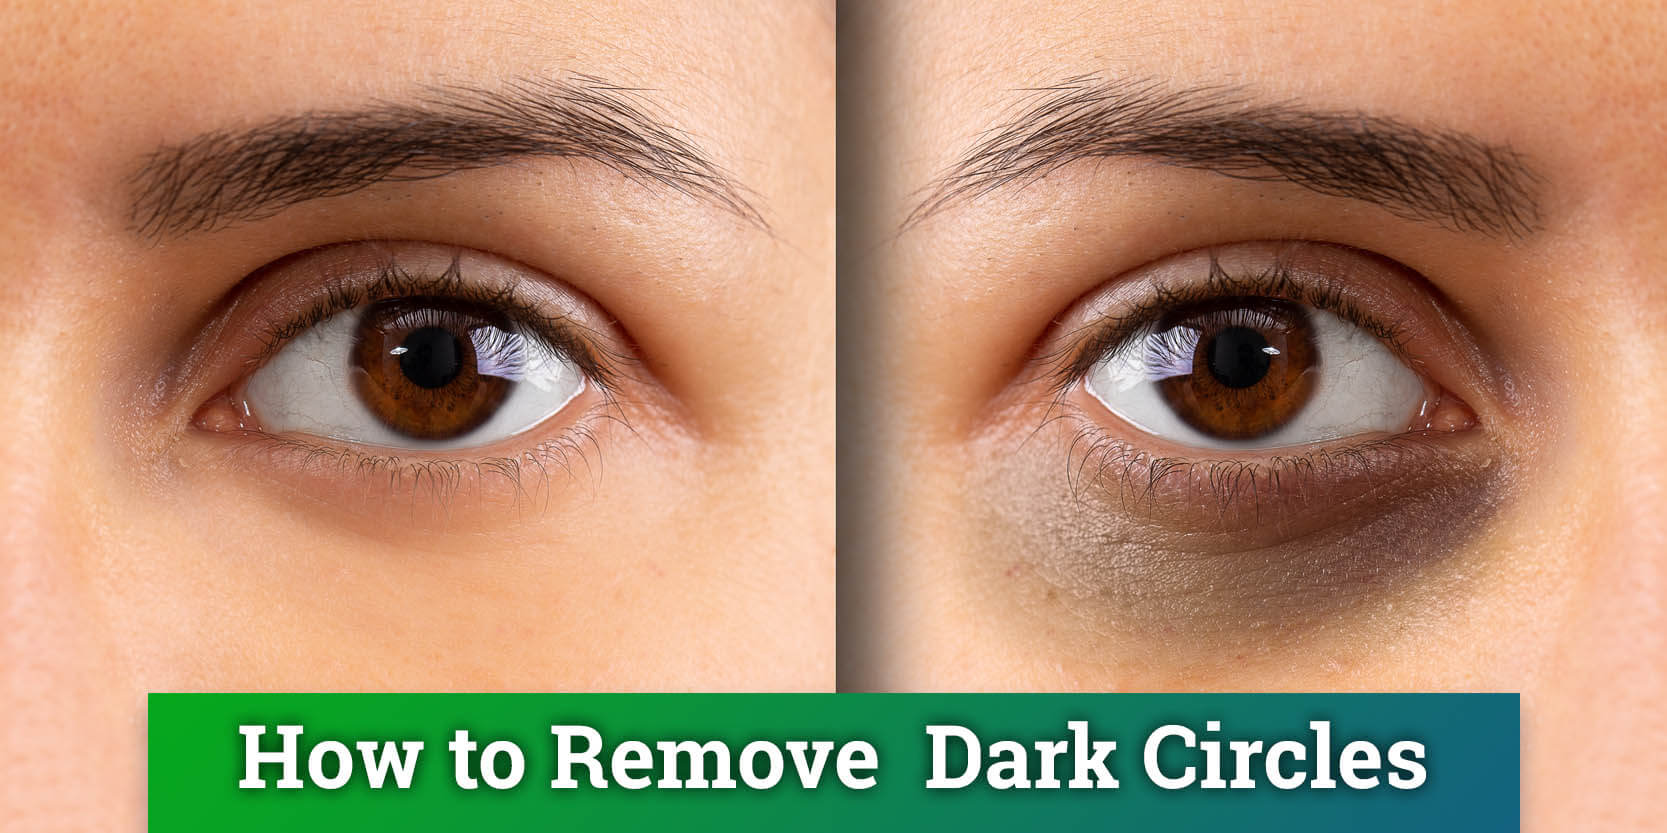 Remove Dark Circles in 3 days with Vitamin- E (100% Works) - YouTube